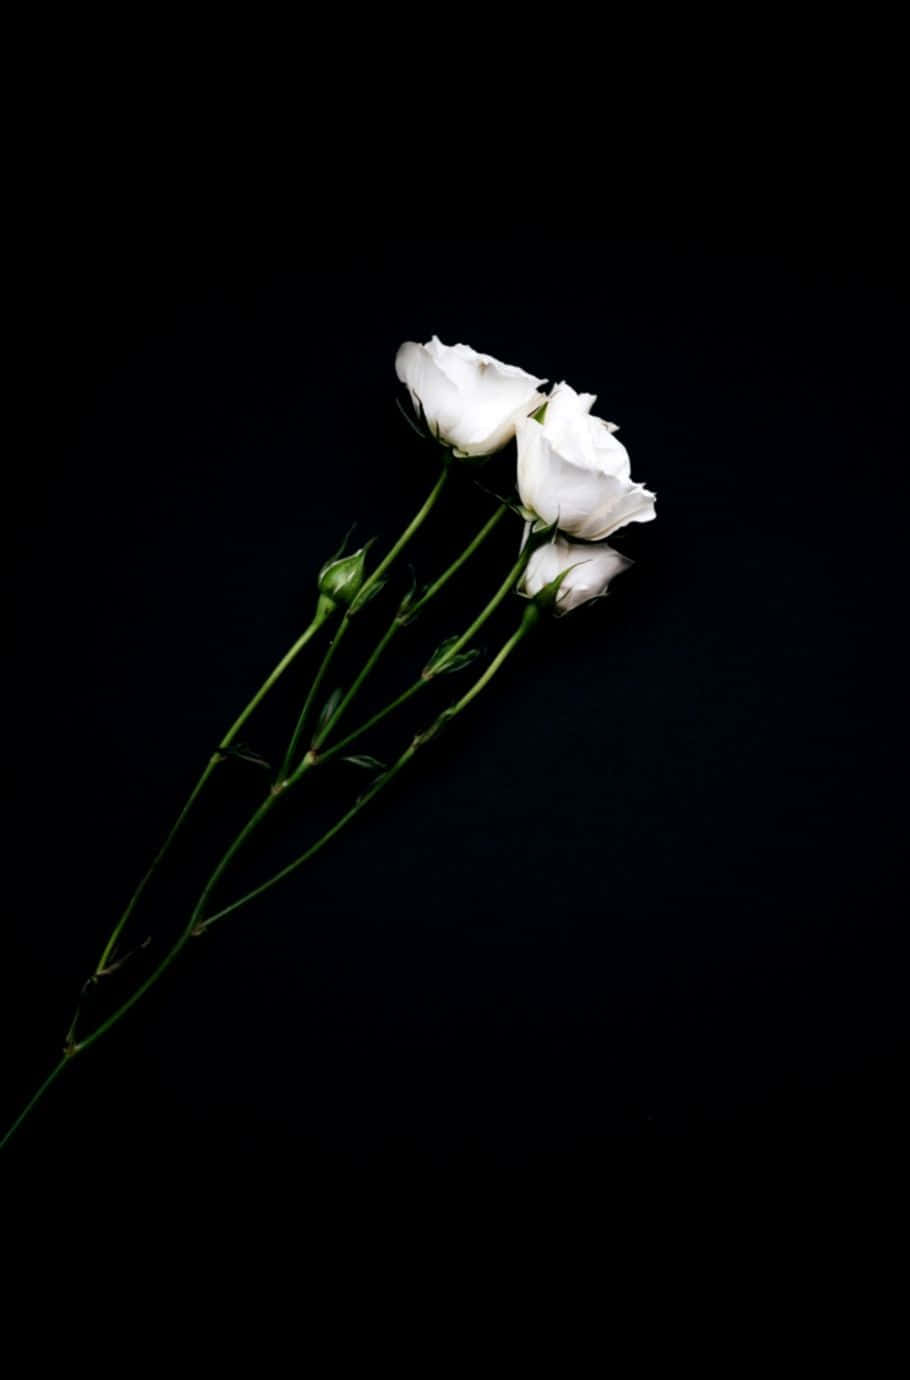 A Vibrant White Rose, A Symbol Of Purity And Elegance